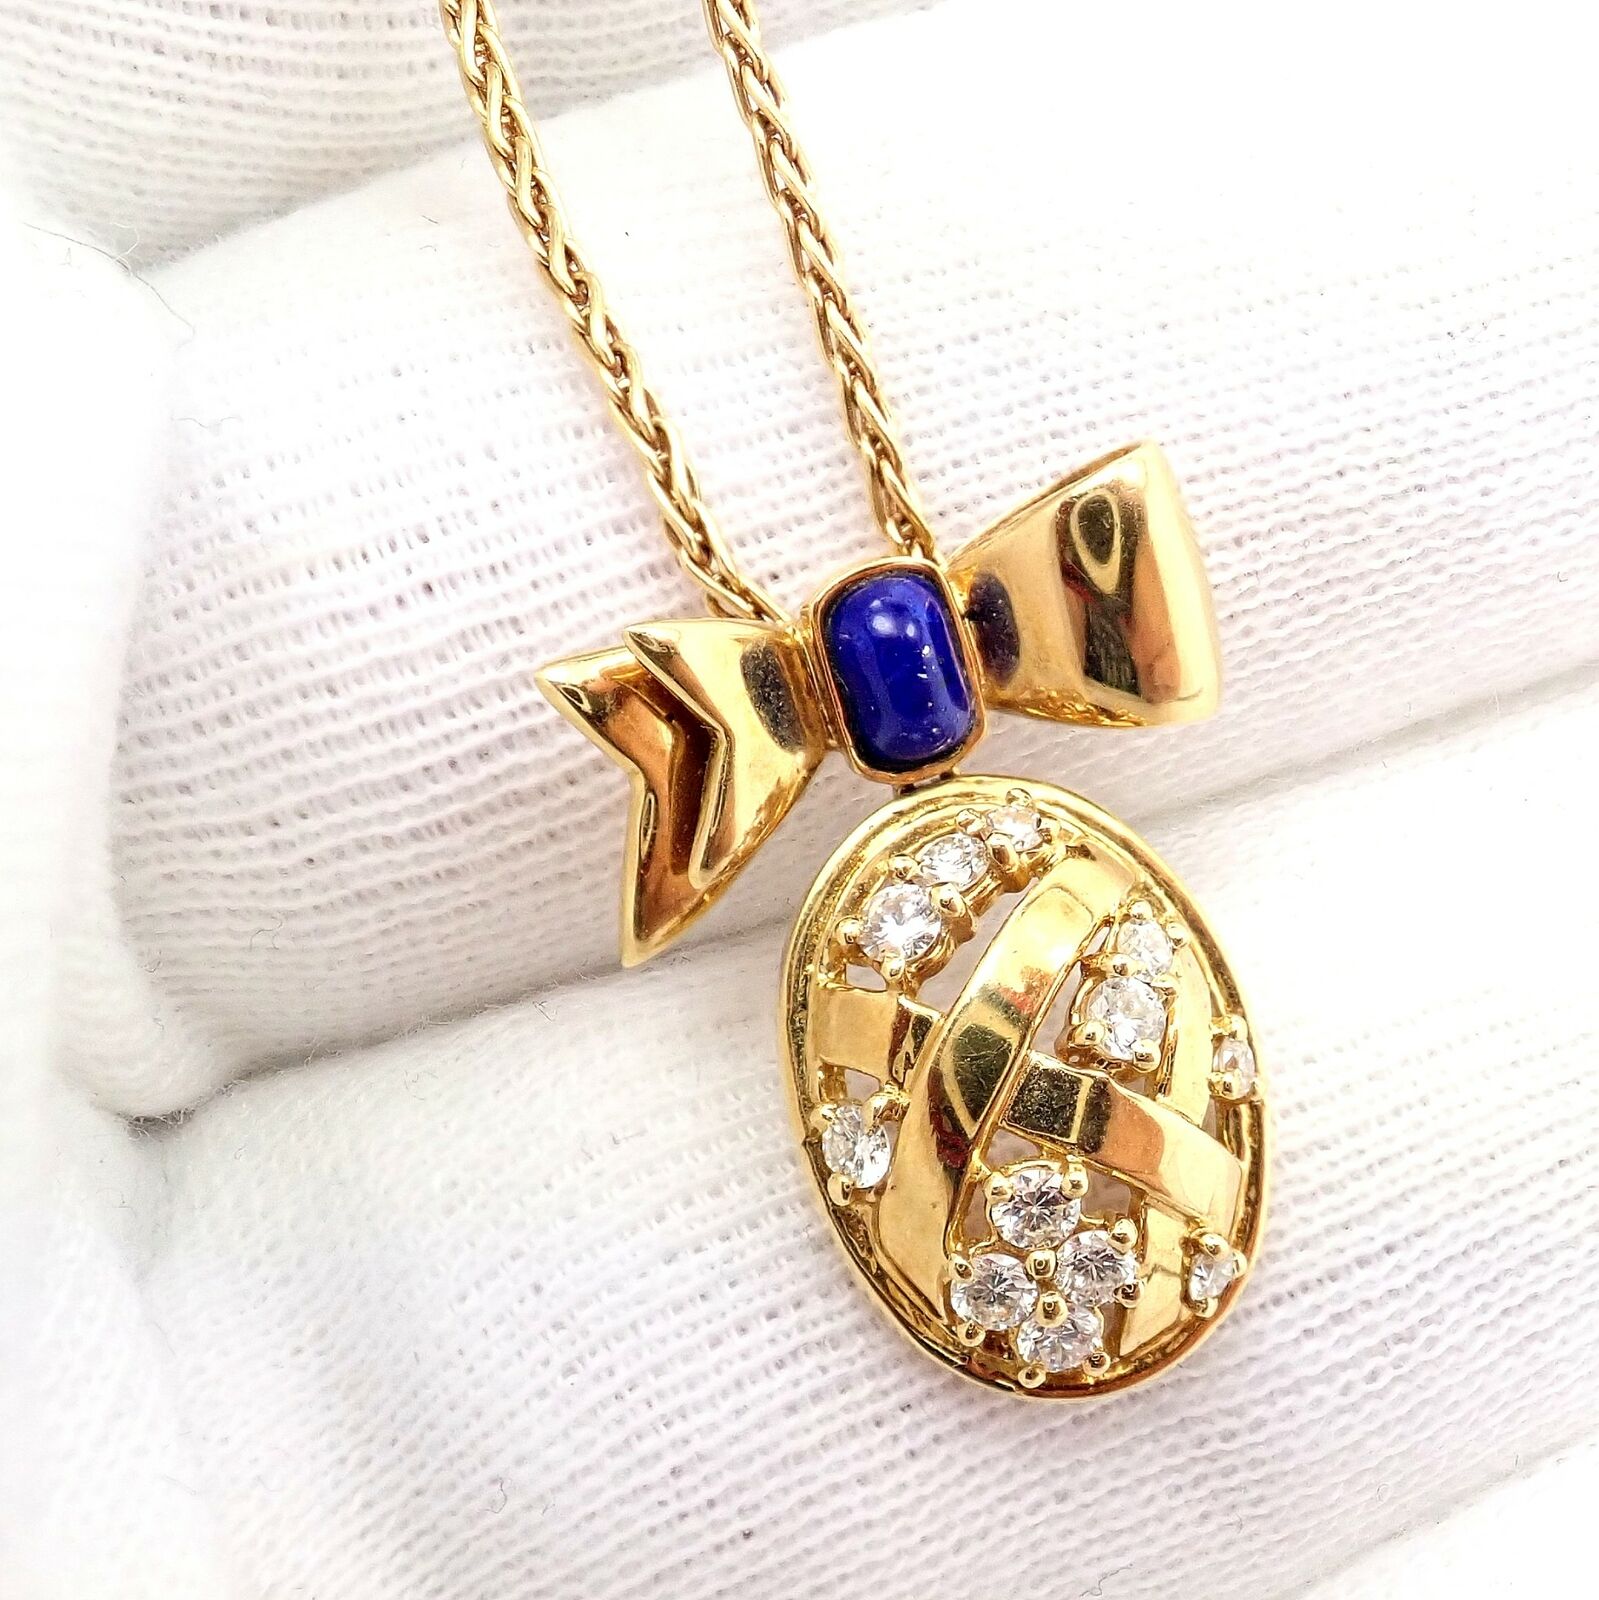 Christian Dior Jewelry & Watches:Fine Jewelry:Necklaces & Pendants Authentic! Christian Dior 18k Yellow Gold Lapis Diamond Egg Pendant Necklace